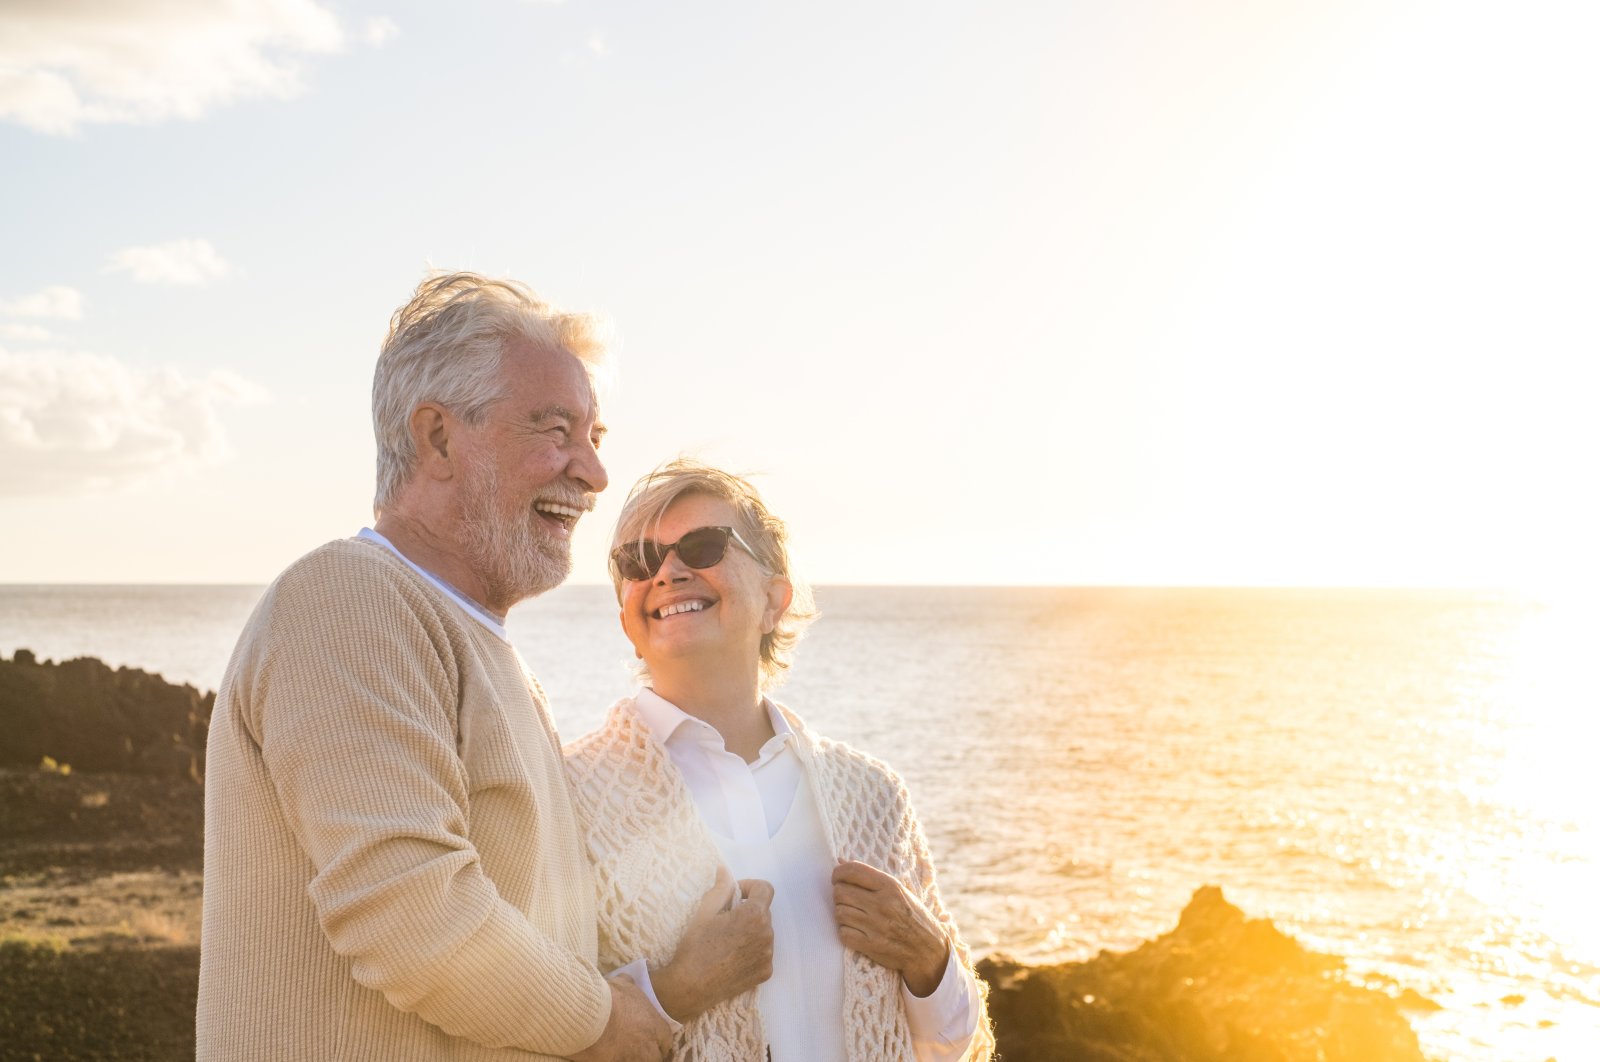 Going by a subjective definition, women admit to feeling &quot;old&quot; significantly later than men do, according to international research published on Monday in the journal Psychology and Aging. (Shutterstock Photo)